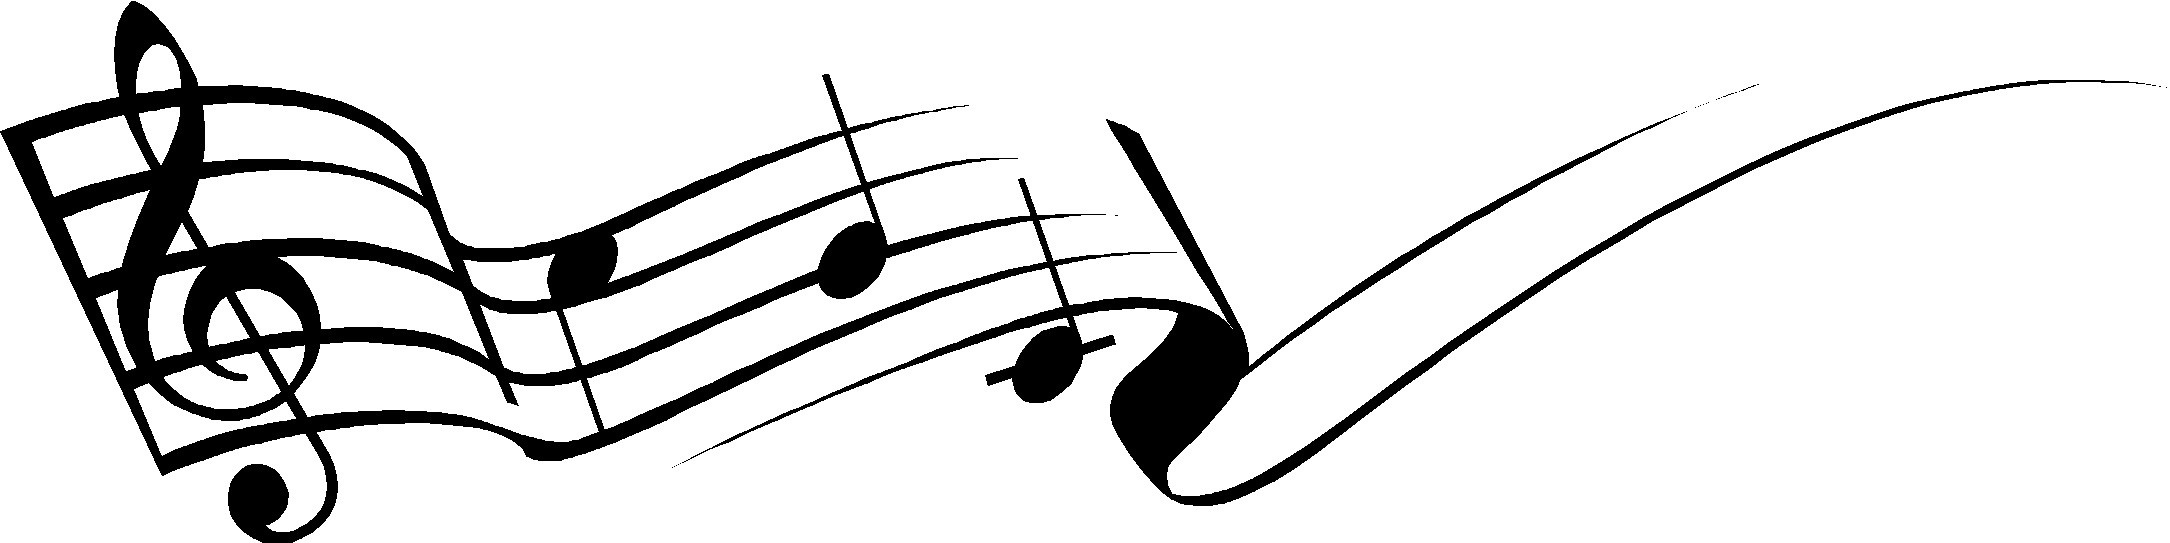 Music Notes No Background Clipart